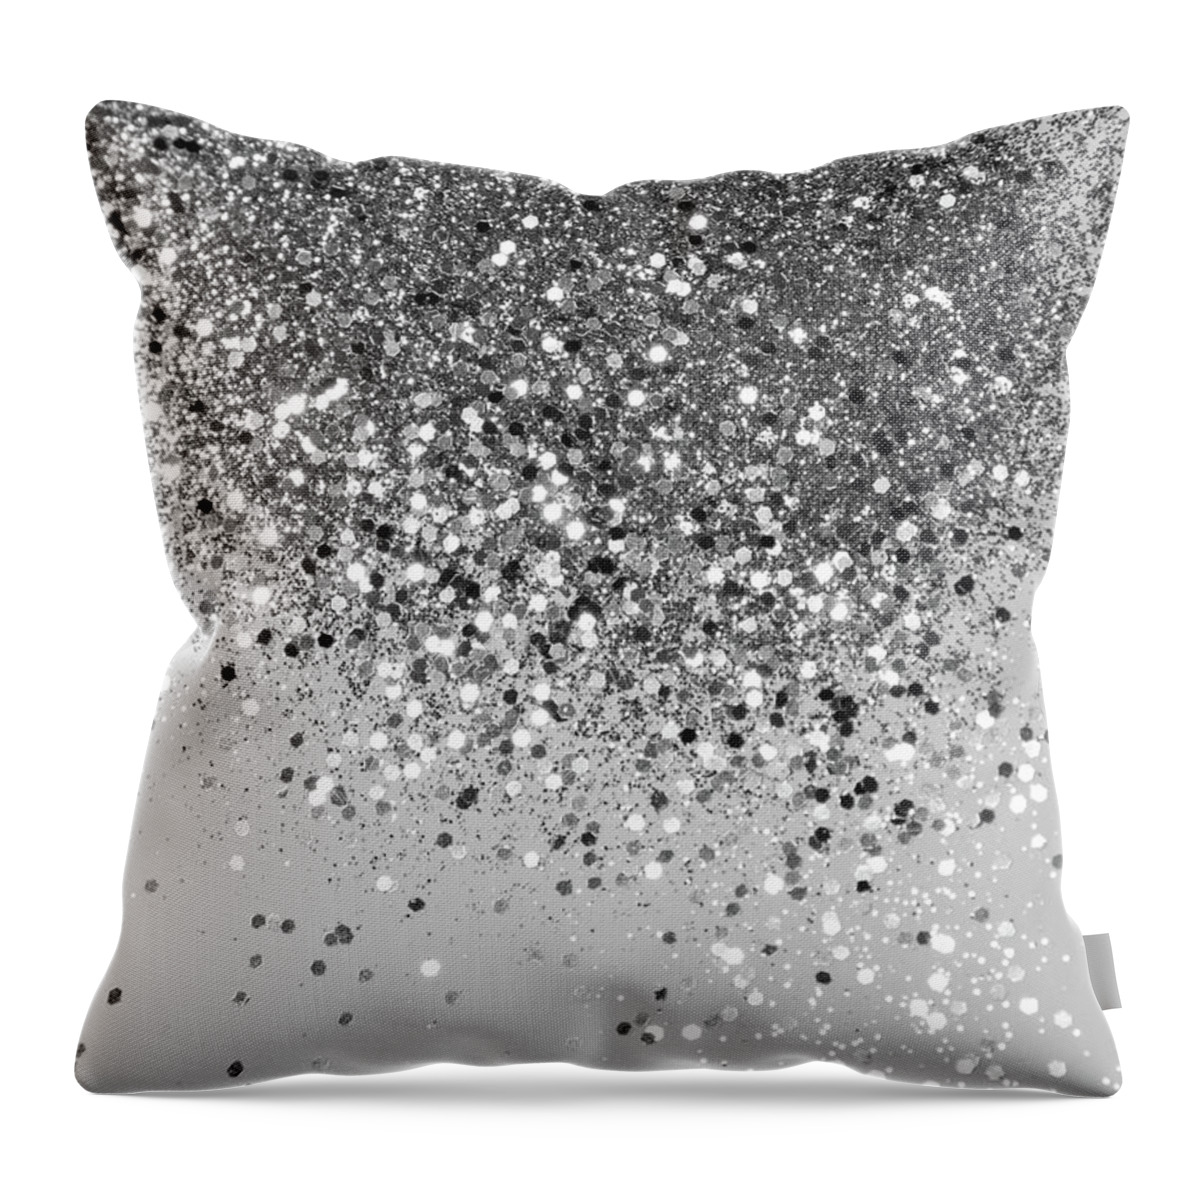 Faux-glitter Throw Pillow featuring the photograph Soft Silver Gray Glitter #1 Faux Glitter Photography #shiny #decor #art by Anitas and Bellas Art